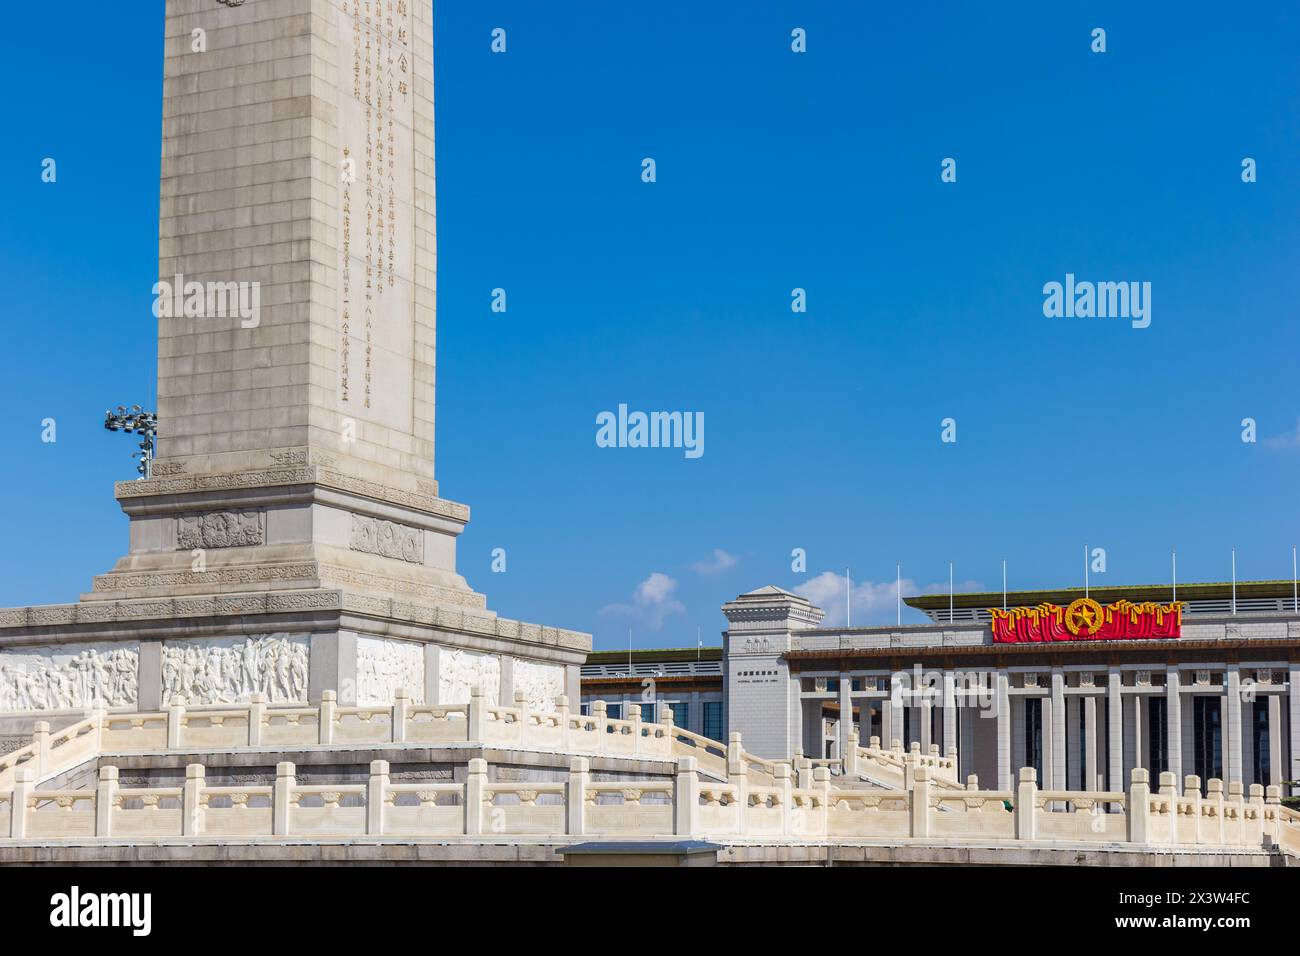 Monument to the Peoples Heroes on the Tiananmen square in Beijing, China Stock Photo